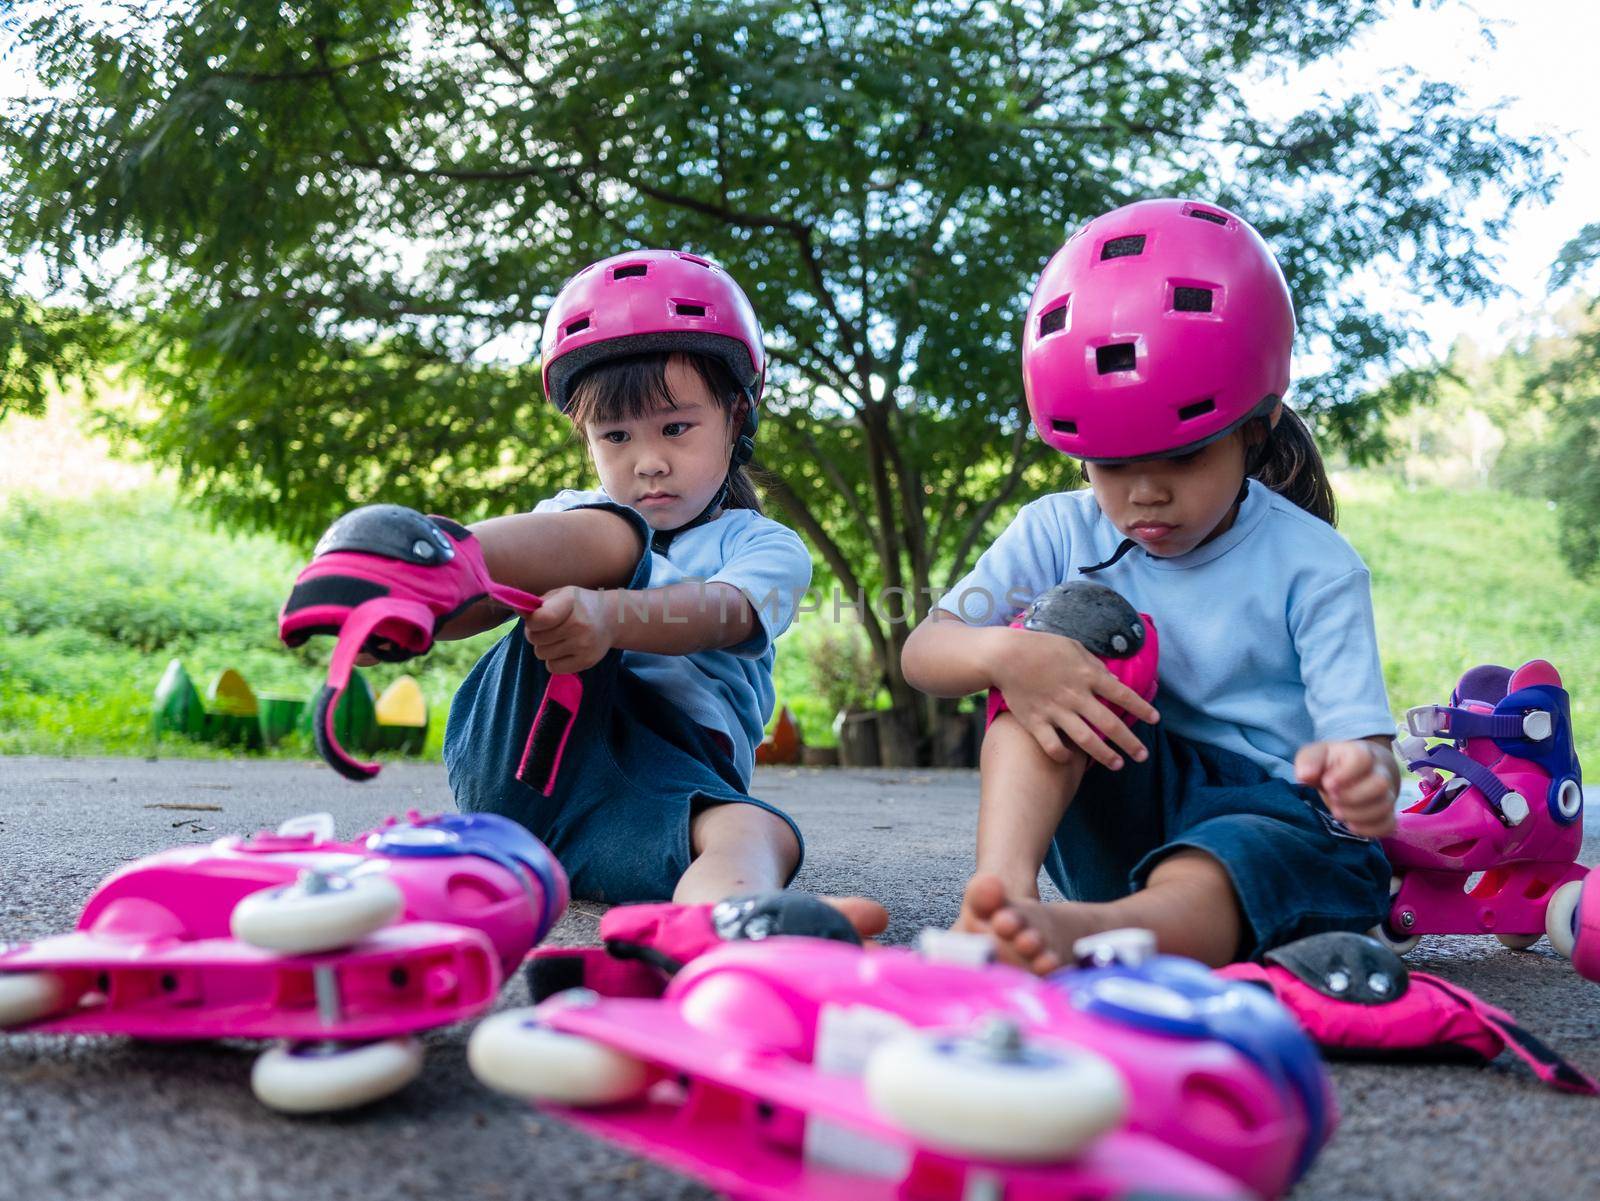 Two sibling sisters wearing protection pads and safety helmet practicing to roller skate on the street in the park. Active outdoor sport for kids. by TEERASAK